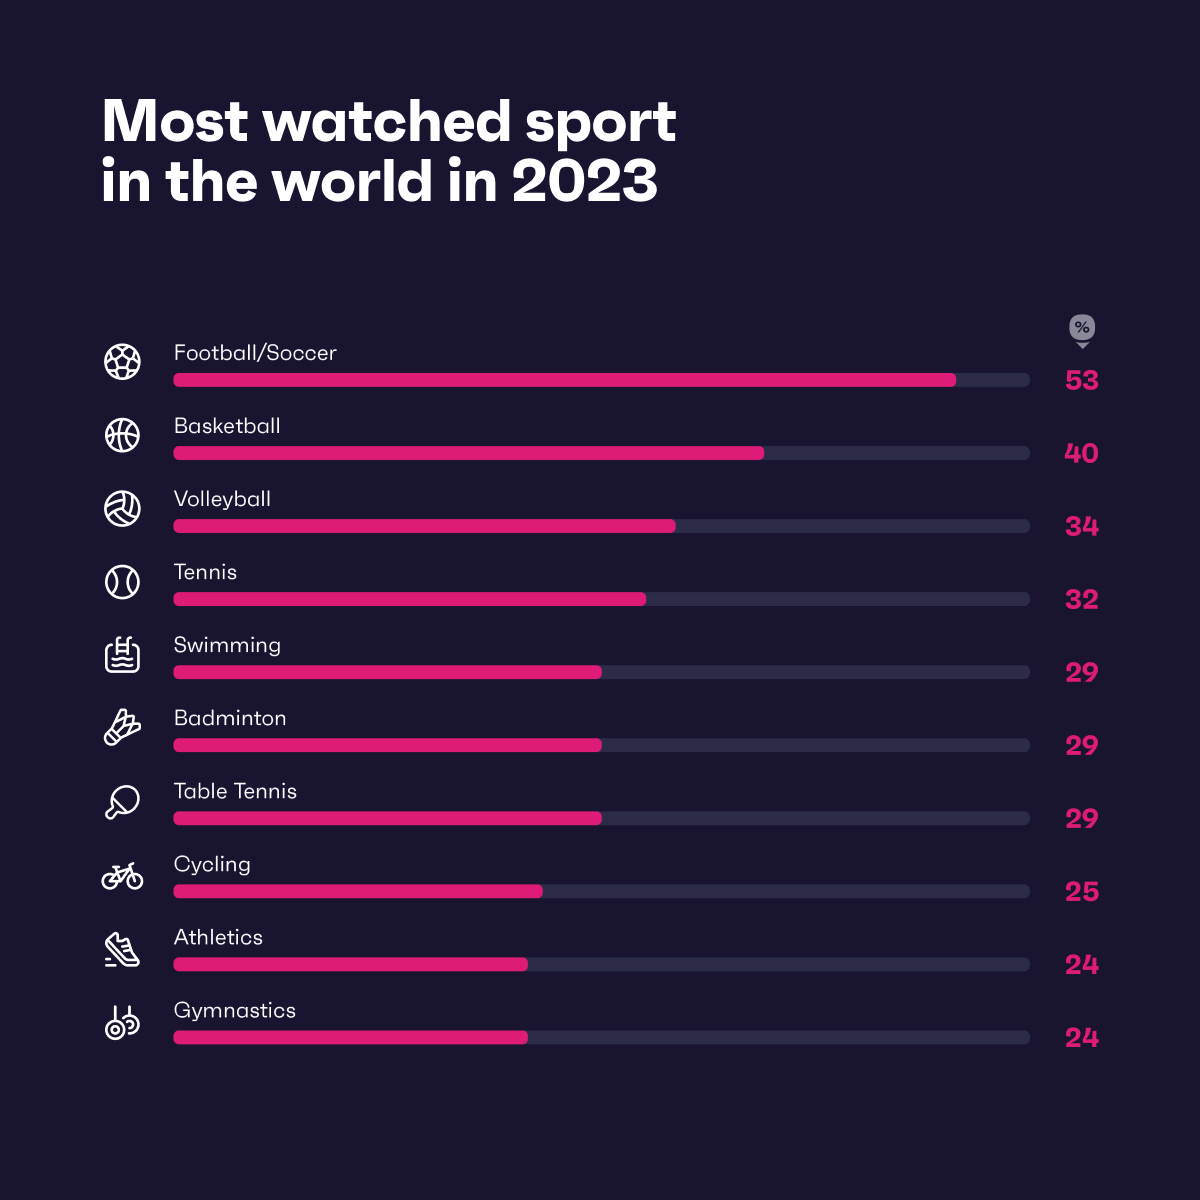 What Are The Most Watched Sports In The World? - GWI